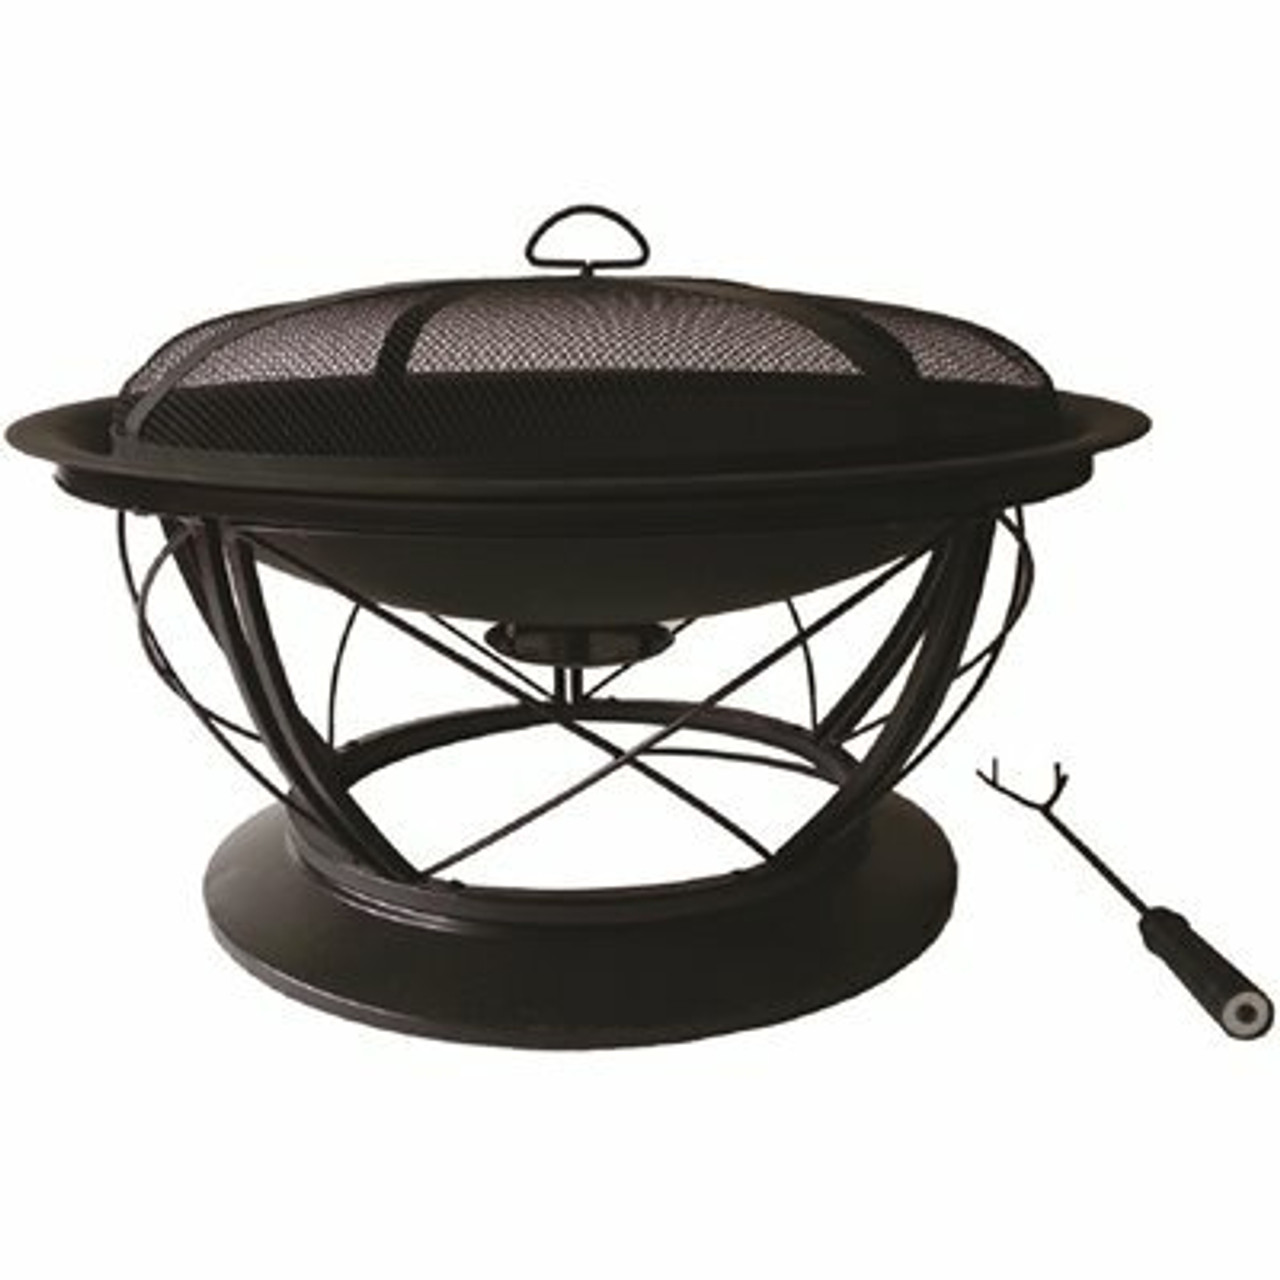 Pleasant Hearth Palmetto 30 In. X 19 In. Round Steel Wood Fire Pit In Rubbed Bronze With Cooking Grid